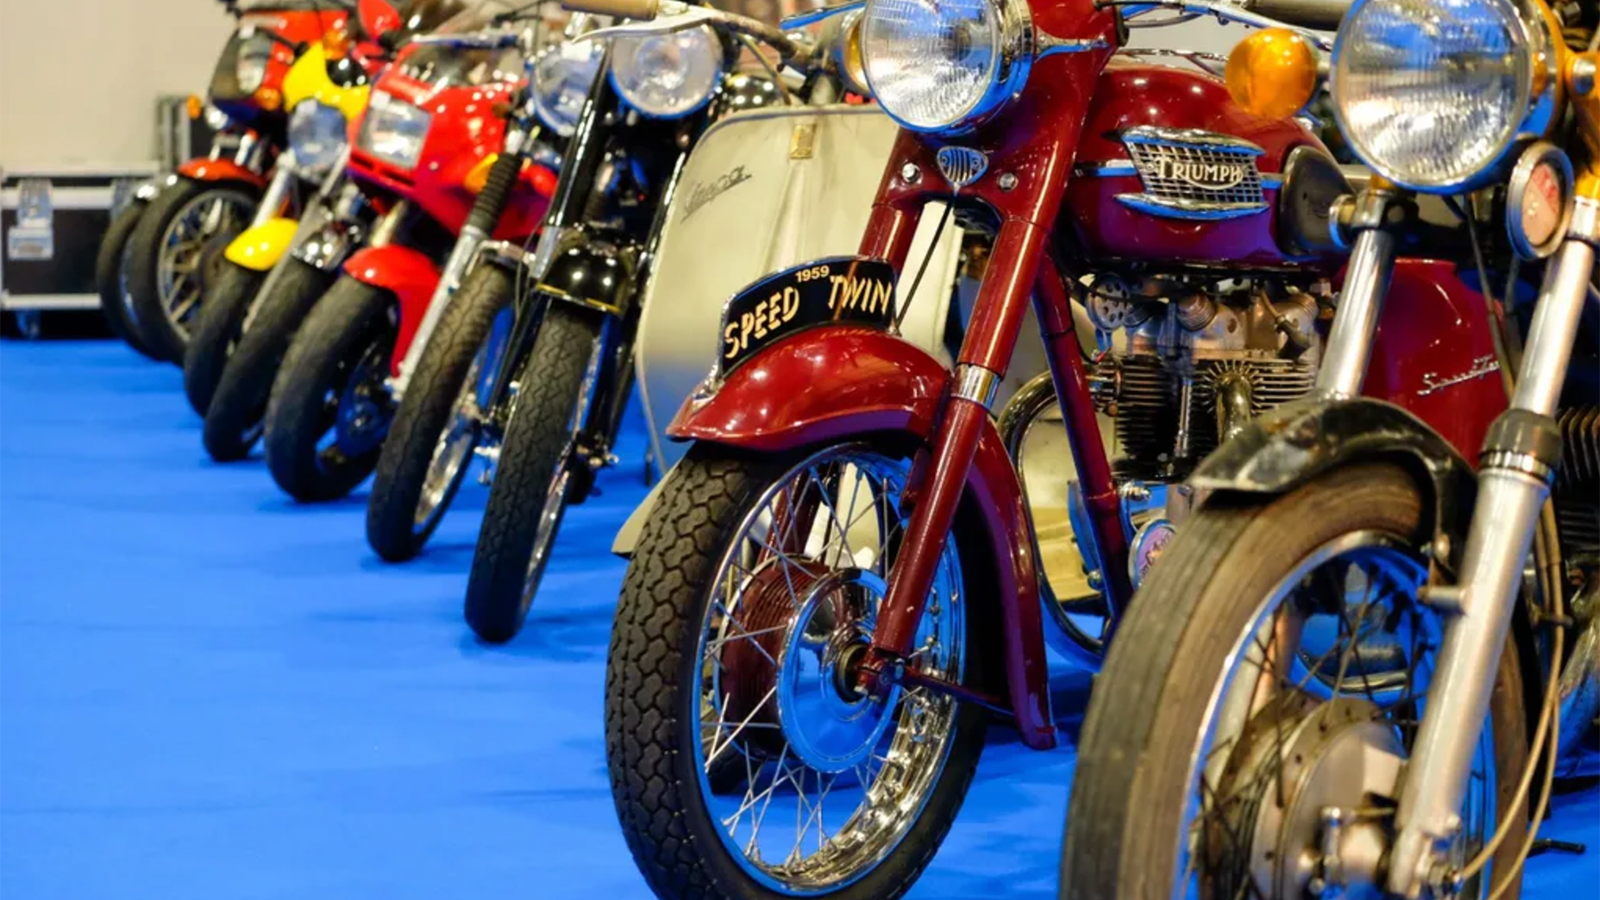 17 reasons not to miss the NEC Classic Motor Show